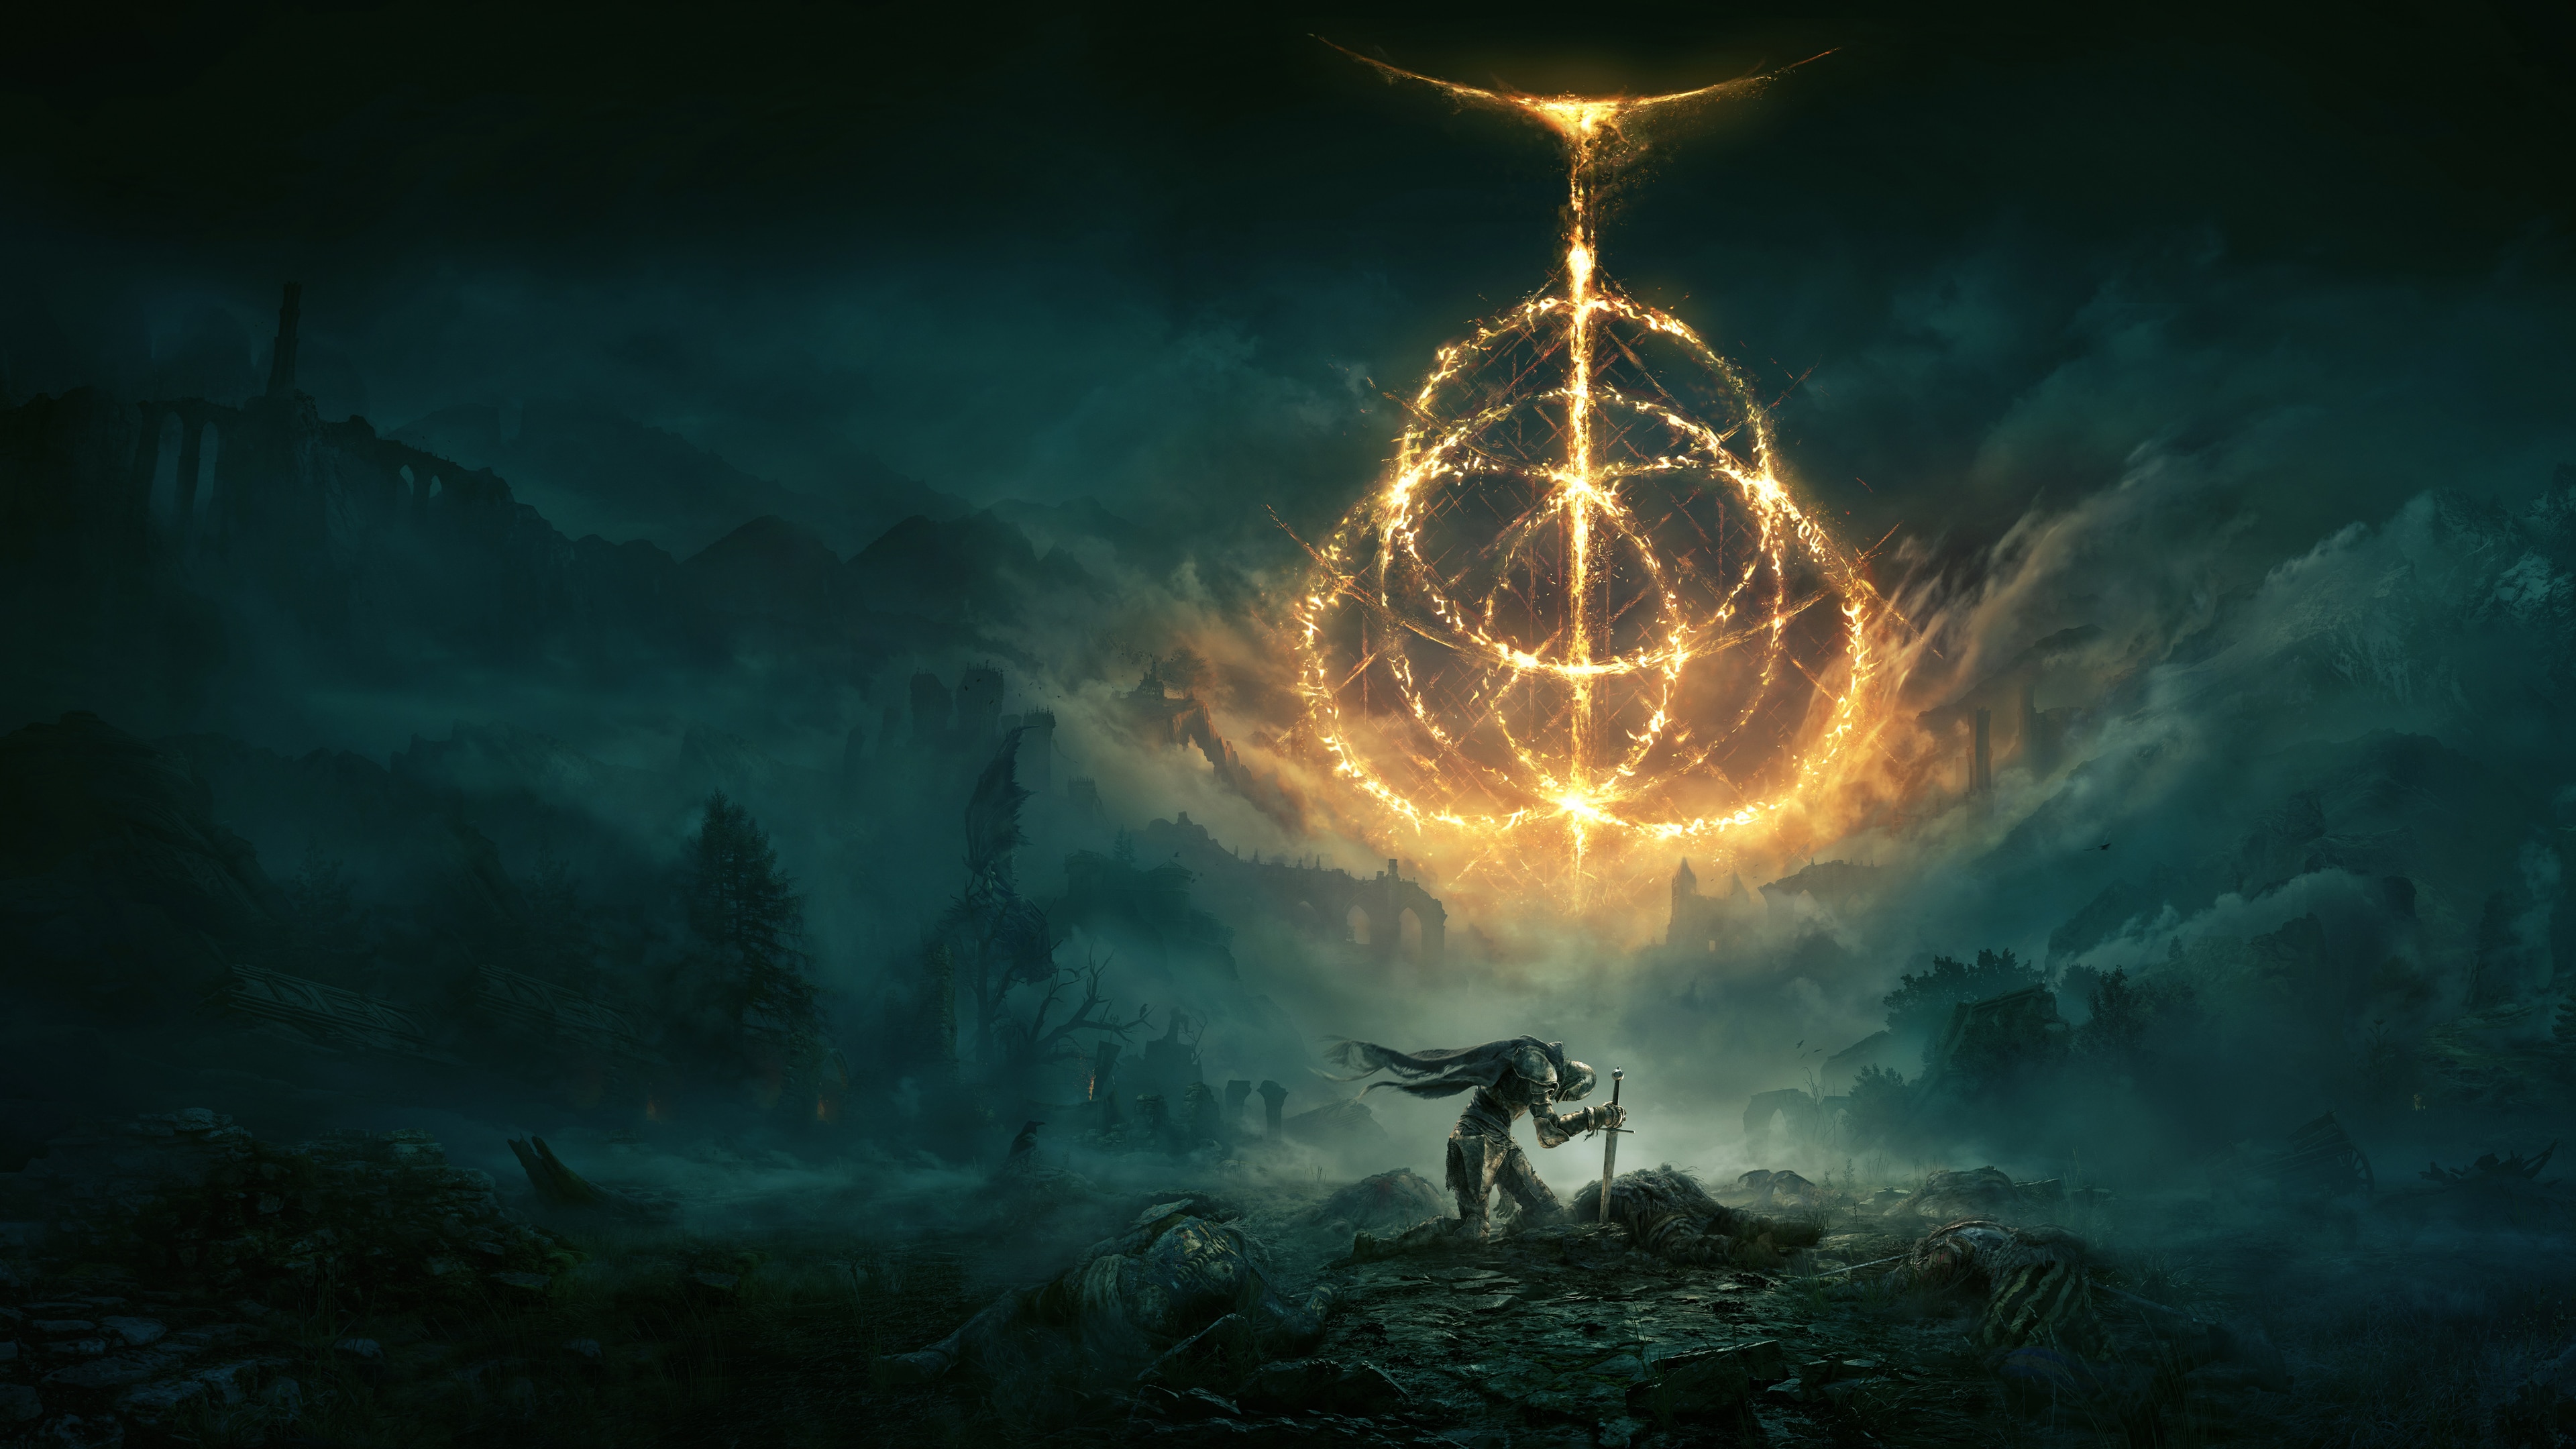 Elden Ring HD Wallpapers and Backgrounds